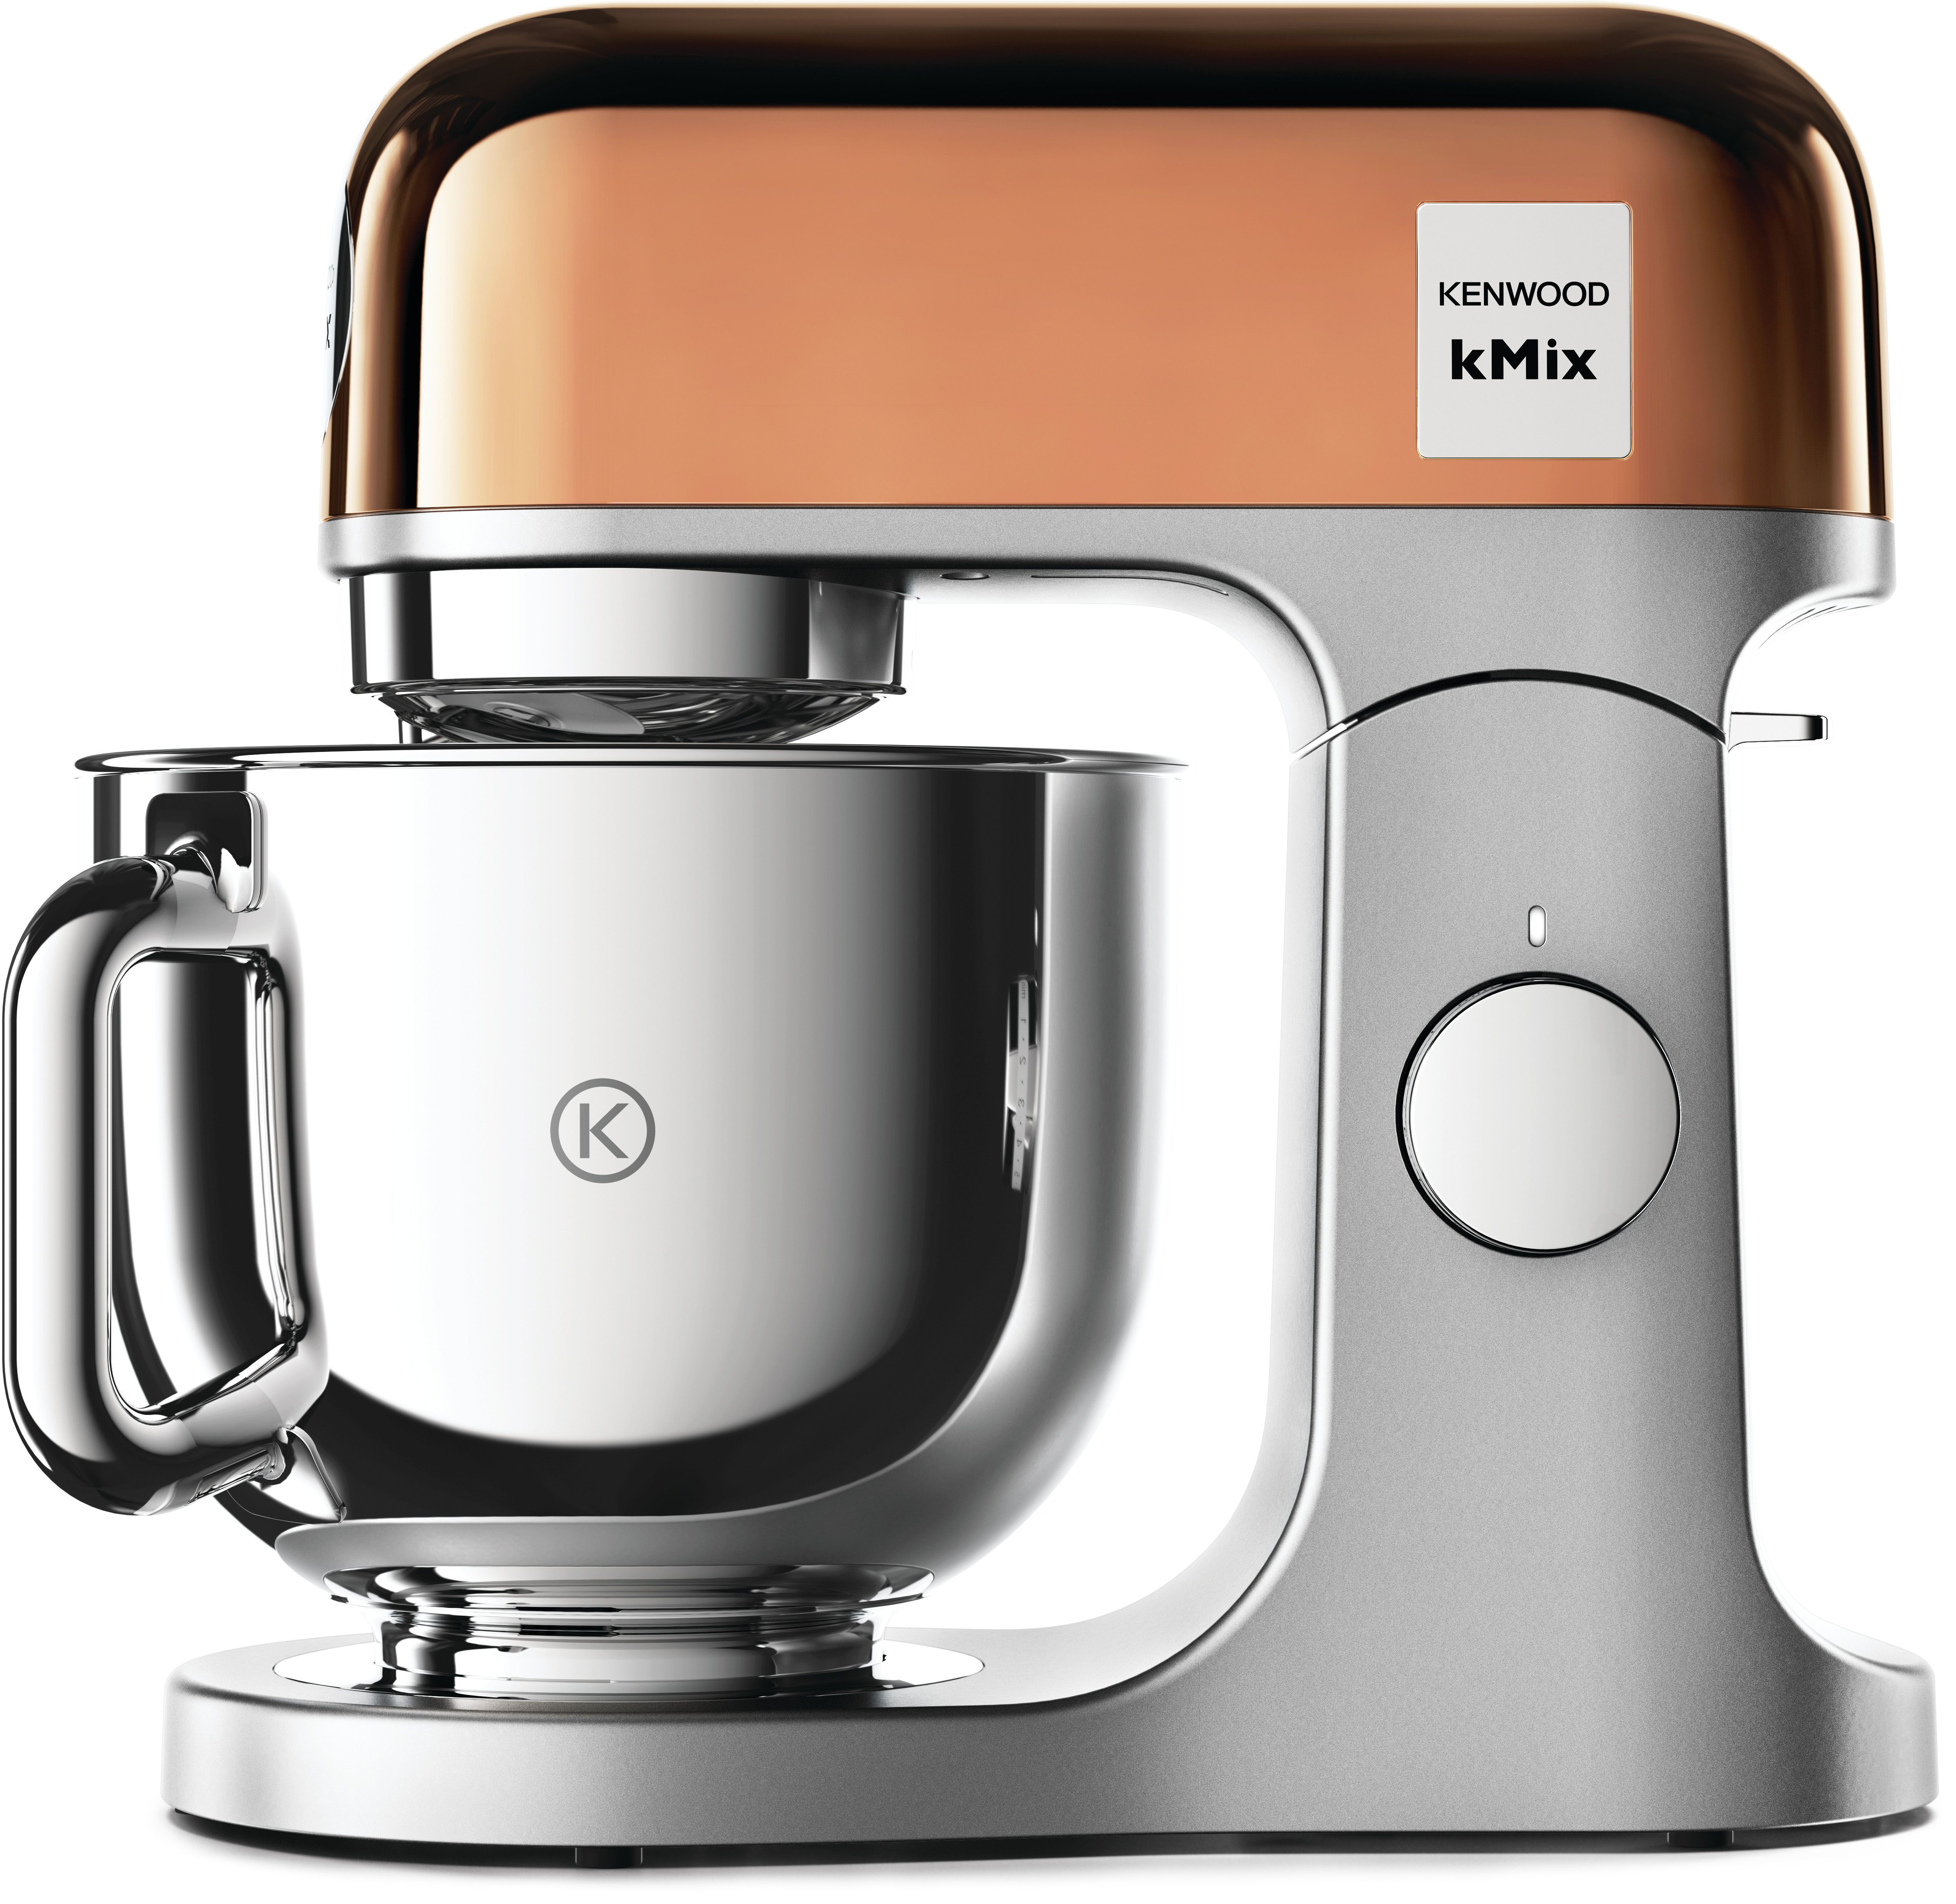 The 10 Best Stand Mixers For Your Home Best Stand Mixer Review